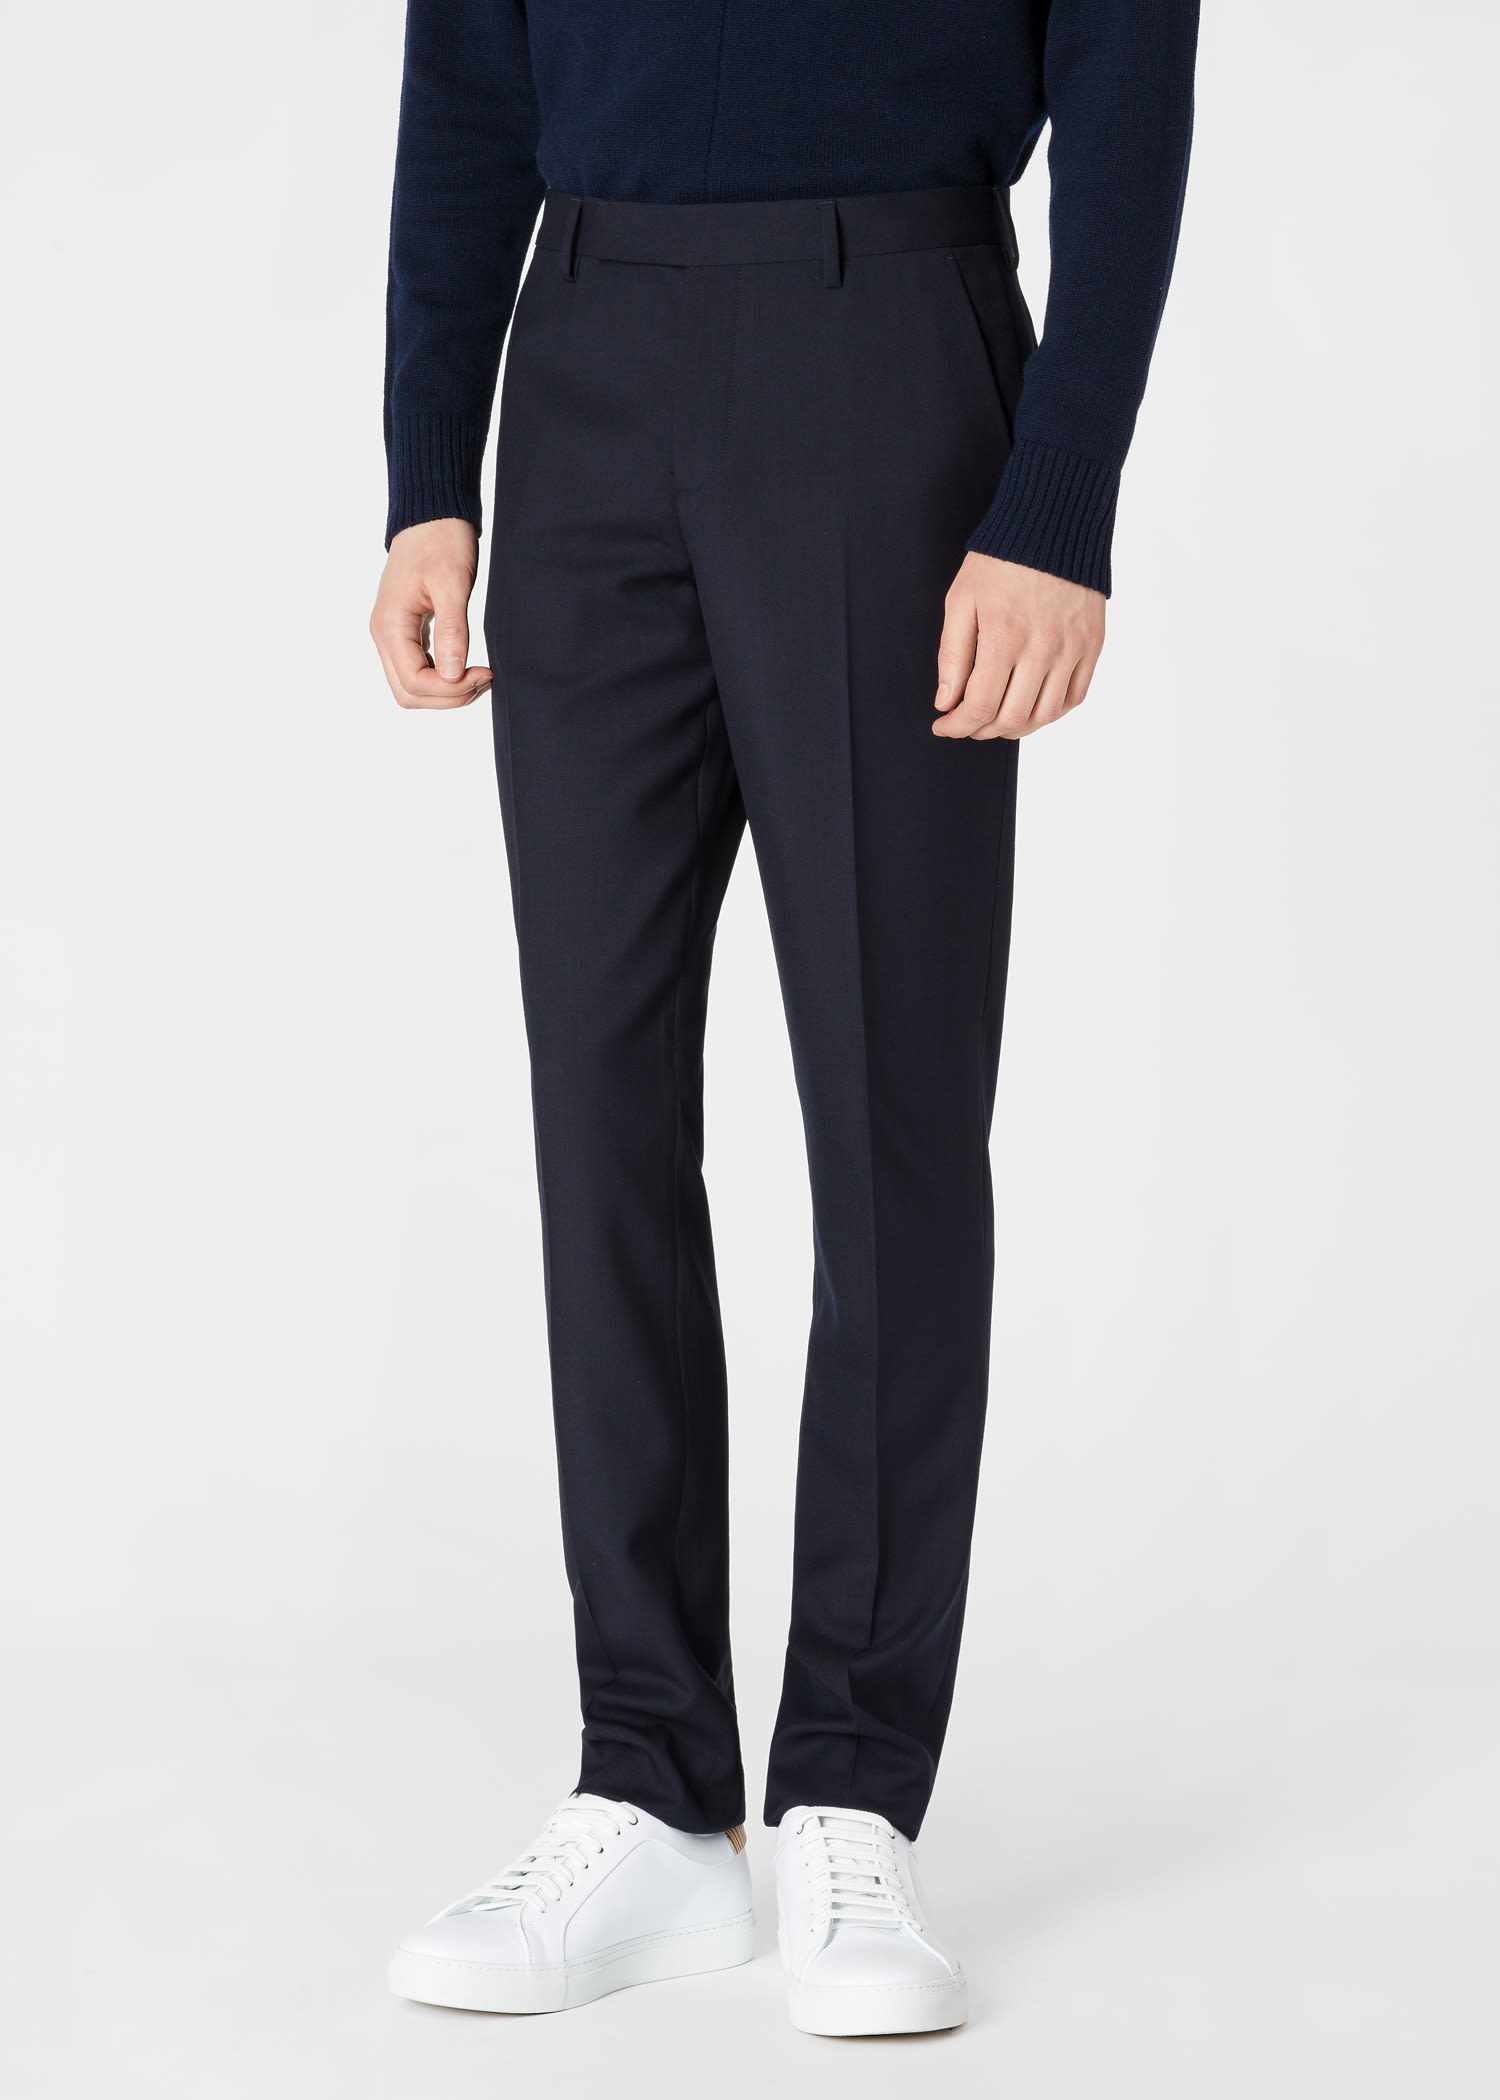 PAUL SMITH Black A Suit To Travel In Soho SlimFit Wool Suit for Men  MR  PORTER